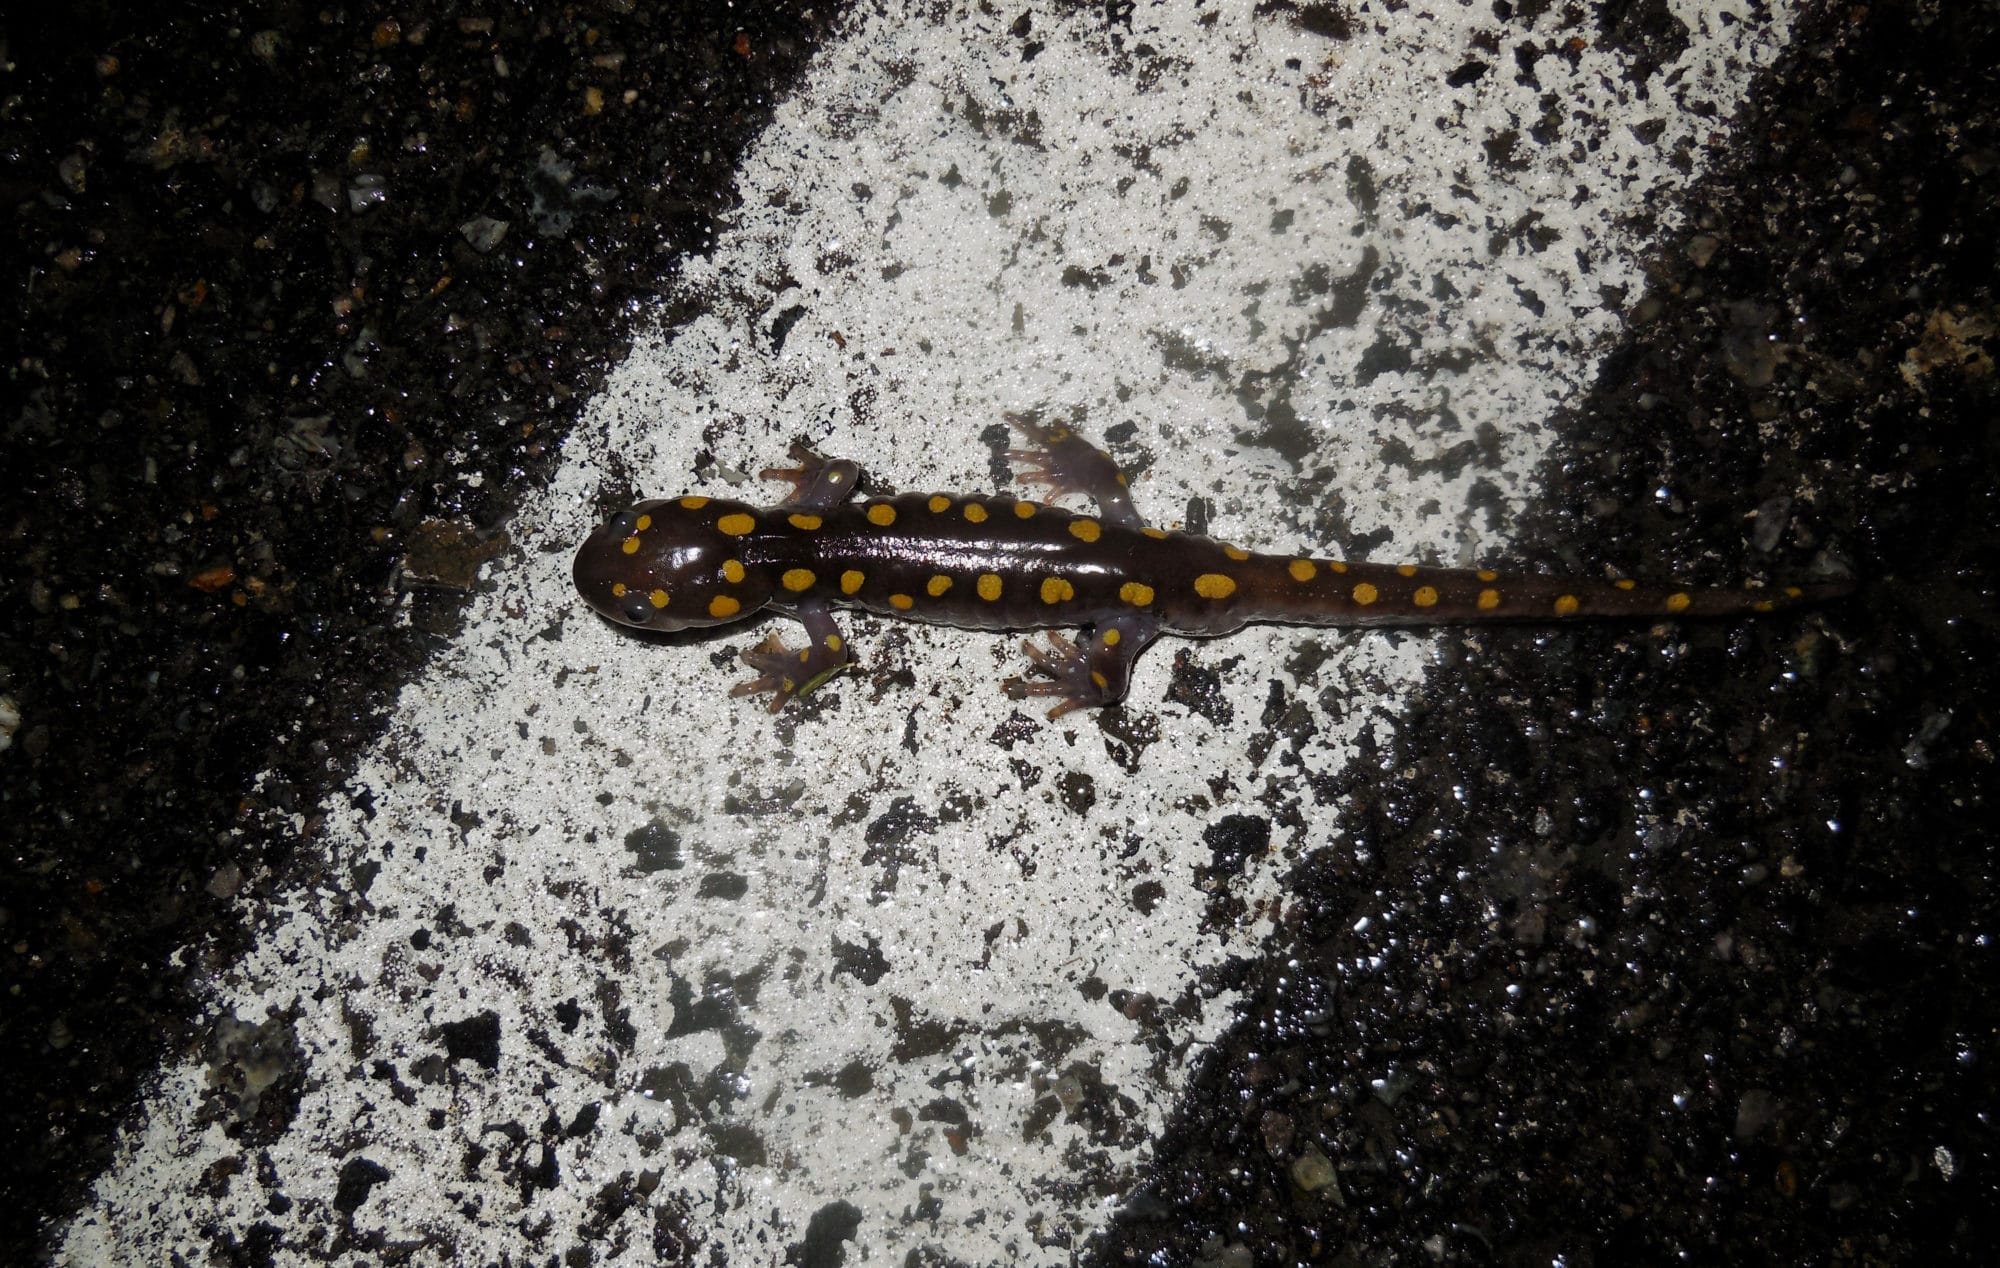 A well-camouflaged spotted salamander crosses the road. (photo © John Baz-Dresch)